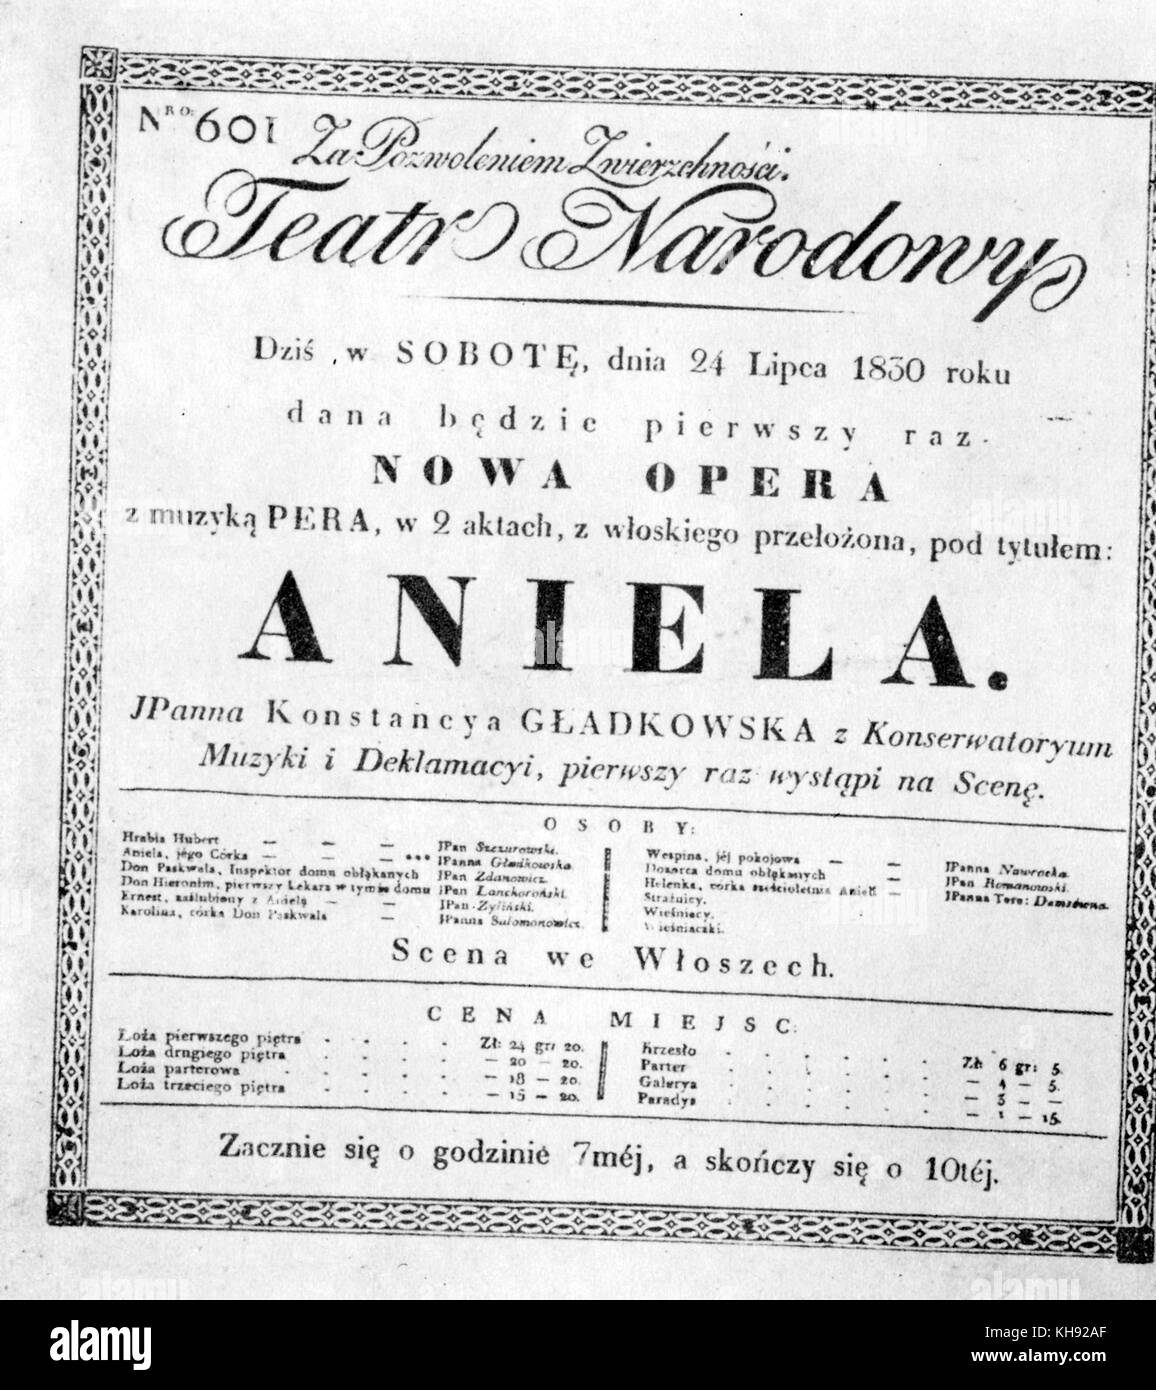 Ferdinando Paer's opera Agnese. Programme for performance at National Theatre, Warsaw on 24 July 1830.  FP:  Italian composer, he was the master of the chapel of Napoléon the First and the manager of the Opéra Comique in Paris. 1 July 1771 - 3 May 1839. Stock Photo